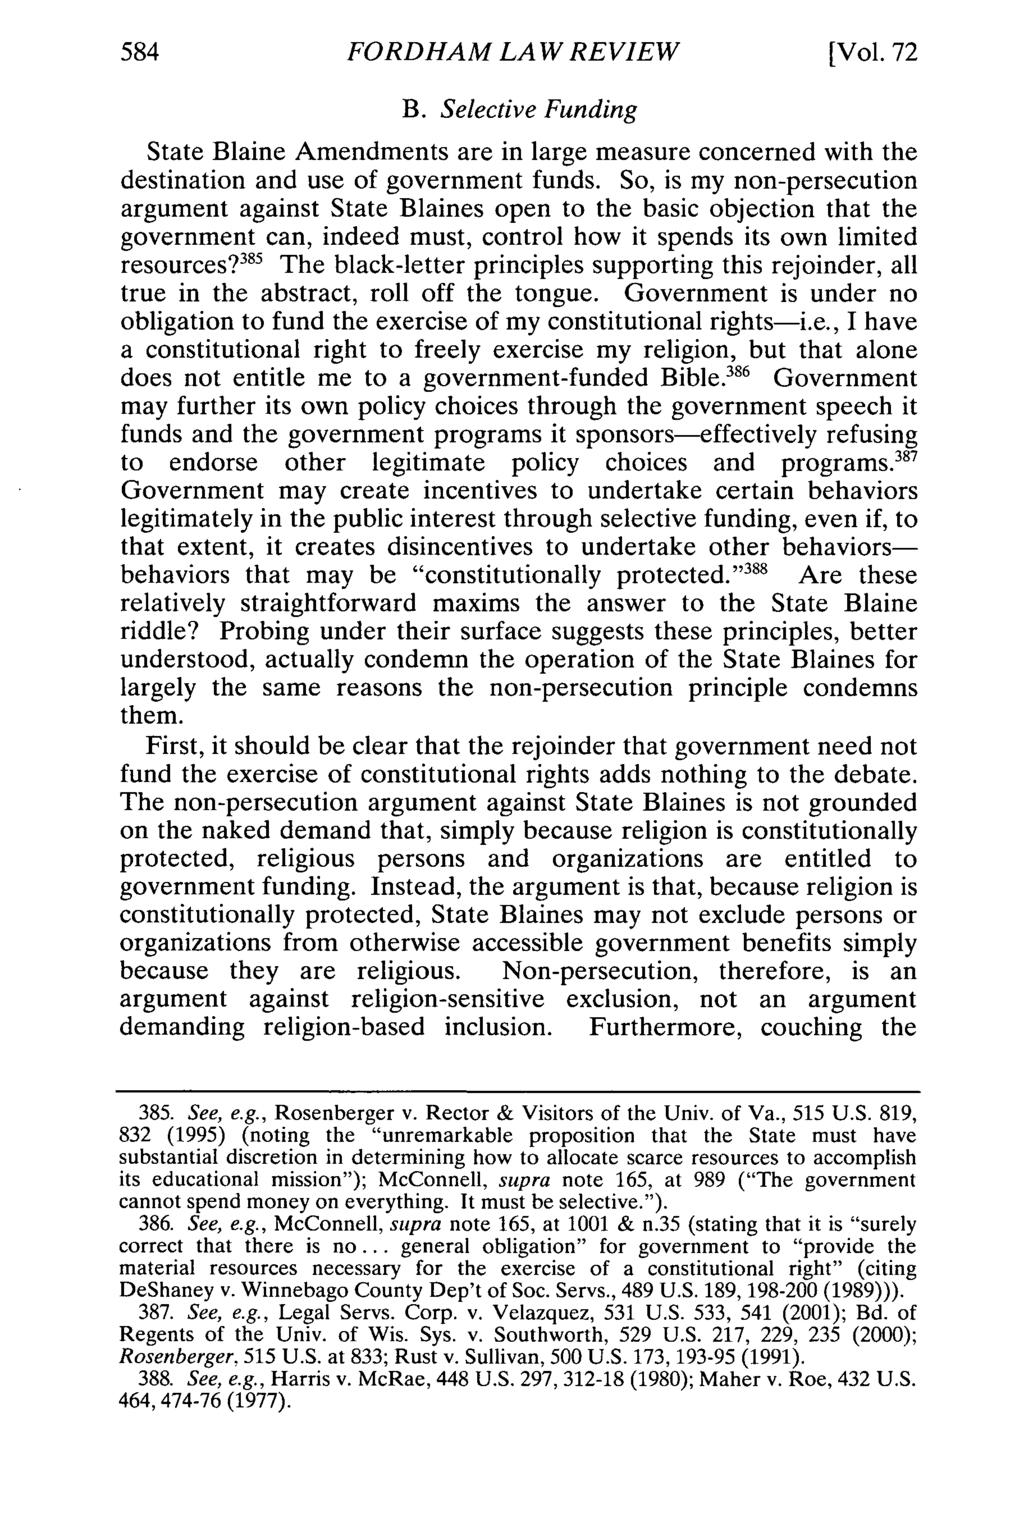 FORDHAM LAW REVIEW [Vol. 72 B. Selective Funding State Blaine Amendments are in large measure concerned with the destination and use of government funds.